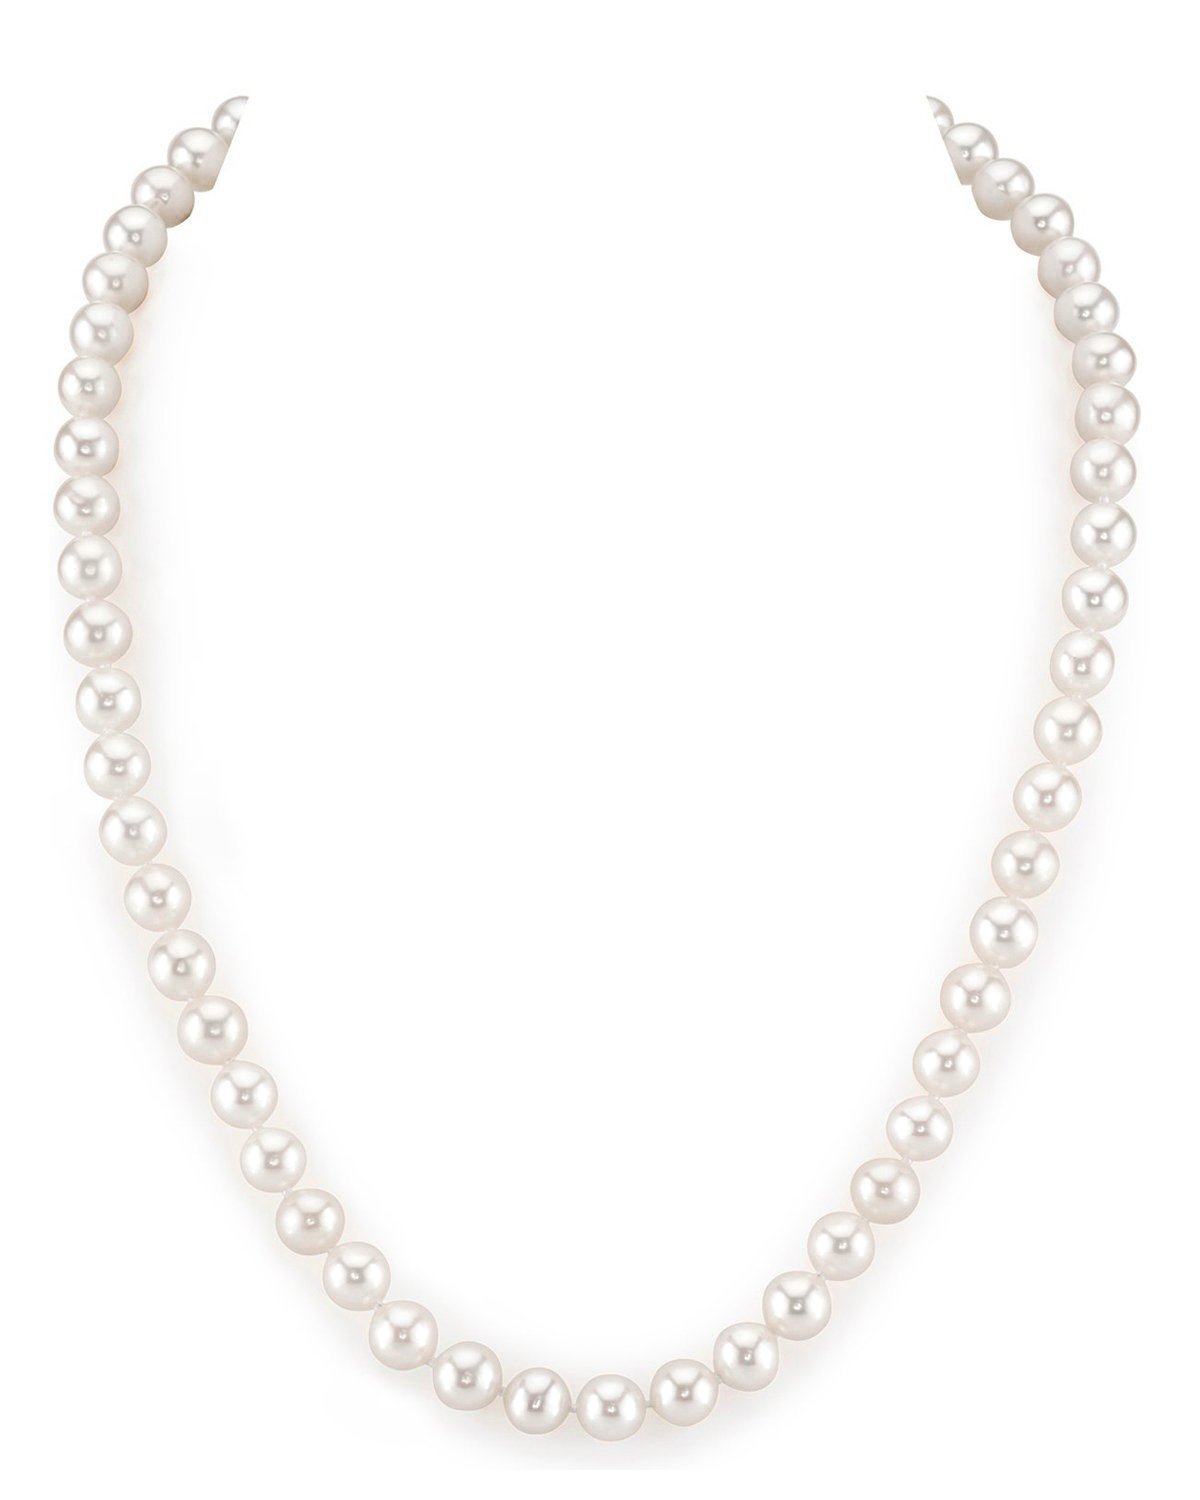 7.0-7.5mm White Freshwater Pearl - AAA Quality Pure Pearls